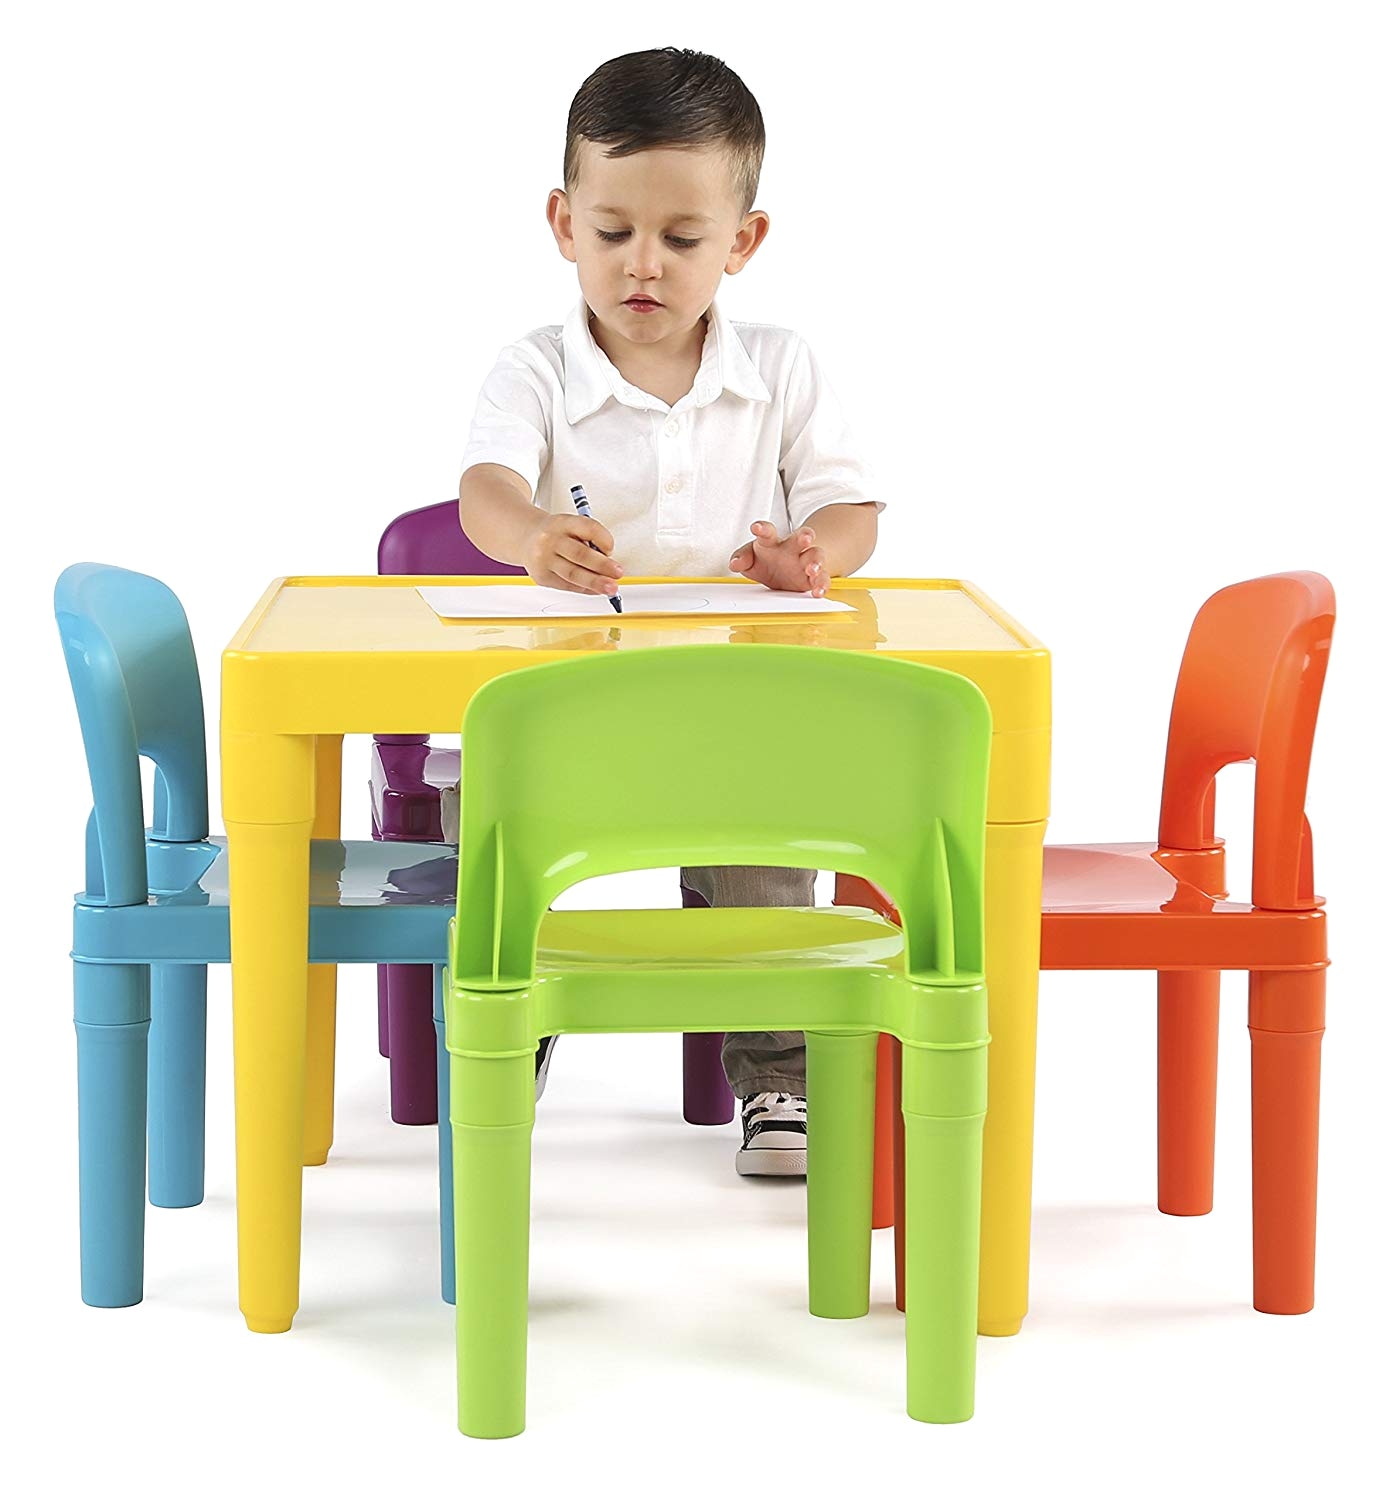 Little Tikes Bright N Bold Table and Chair Set Amazon Com tot Tutors Kids Plastic Table and 4 Chairs Set Vibrant